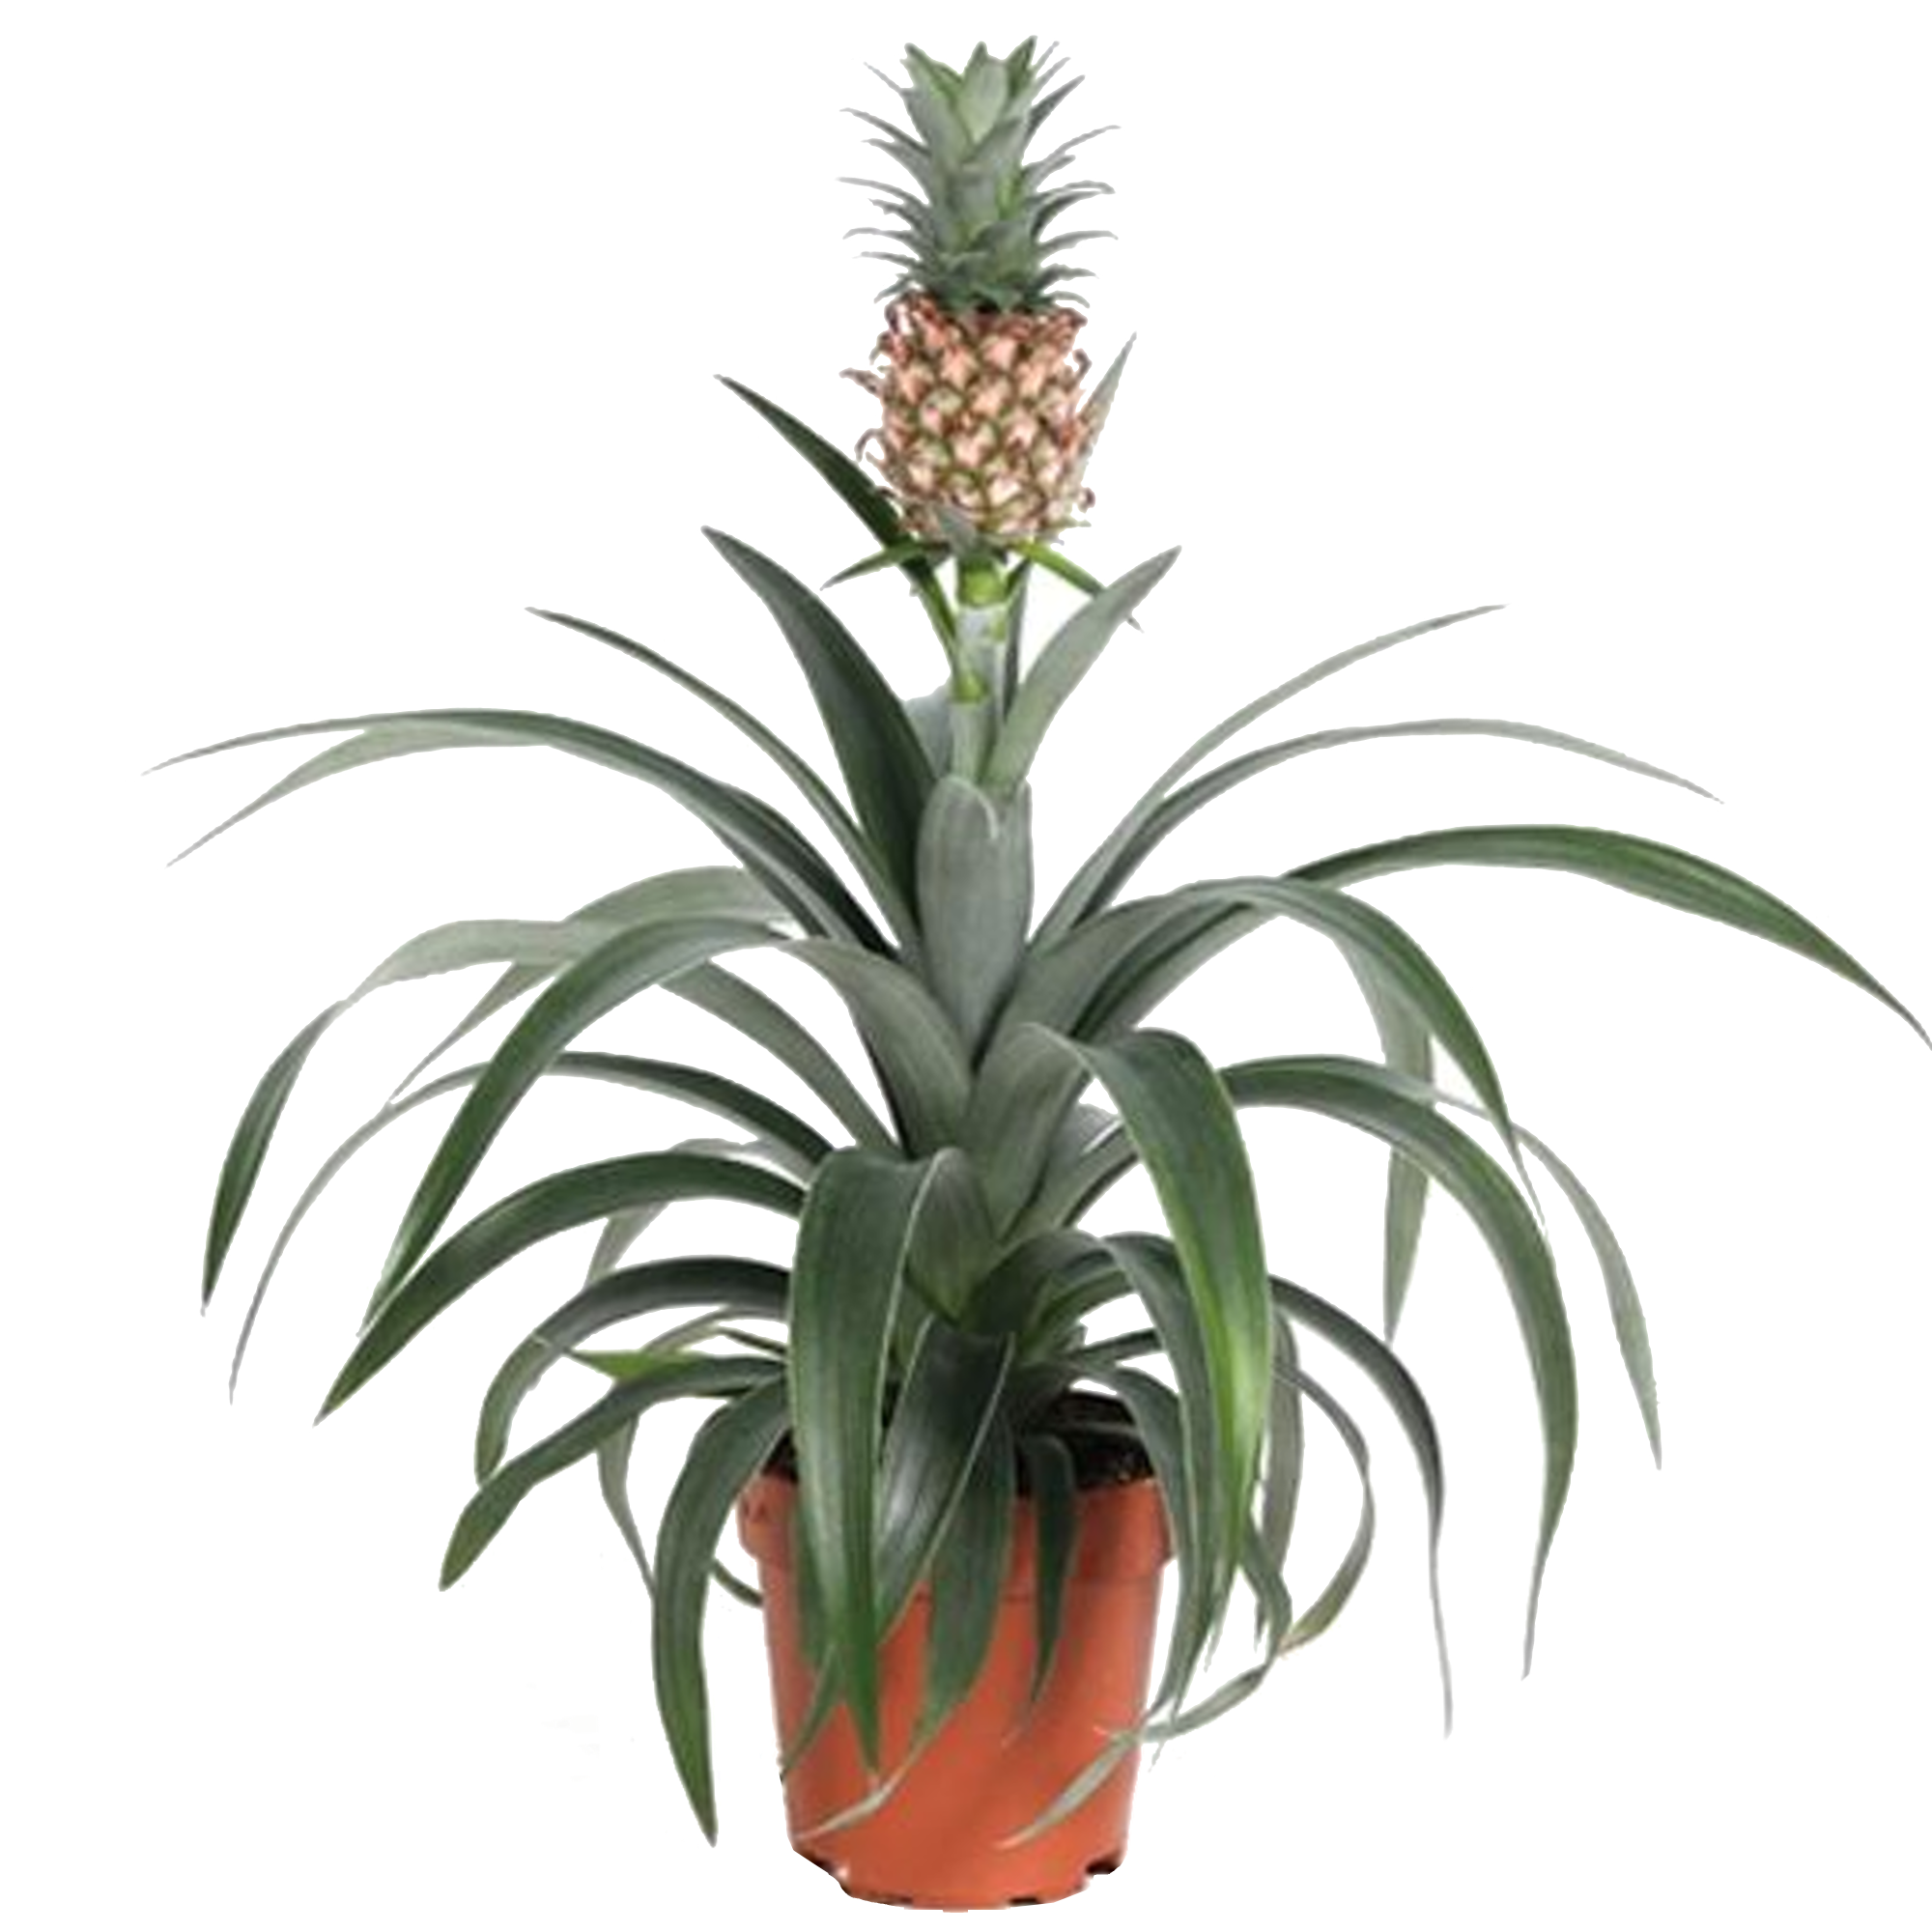 Zier-Ananas 12 cm Topf + product picture